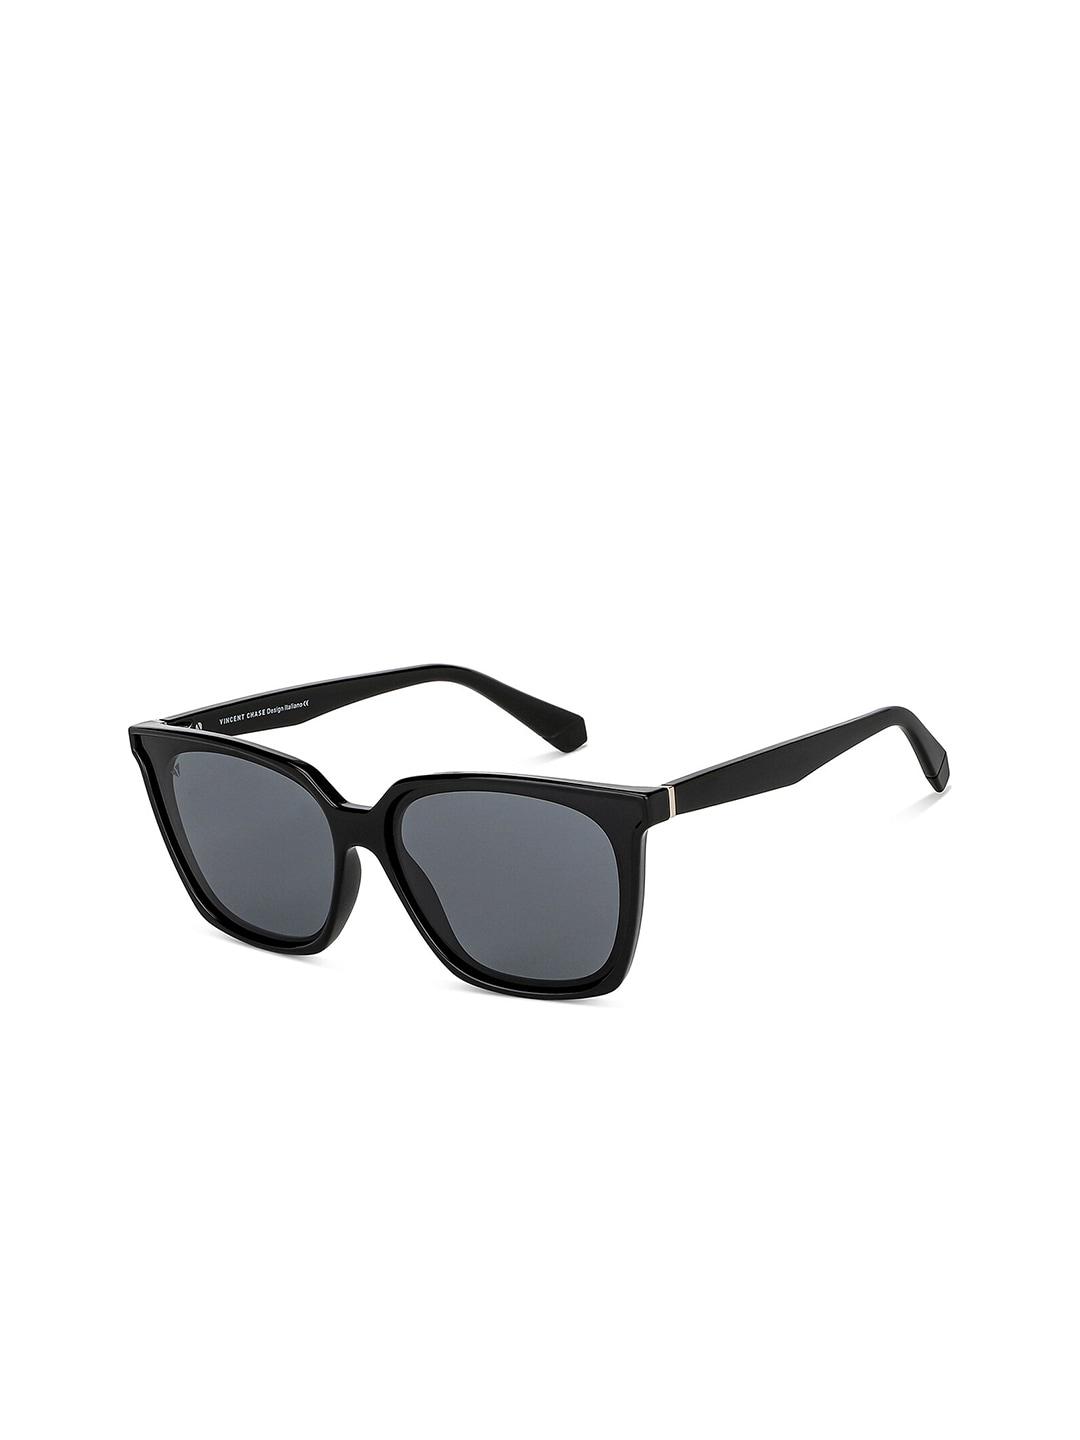 Vincent Chase Unisex Grey Lens & Black Wayfarer Sunglasses with Polarised and UV Protected Lens